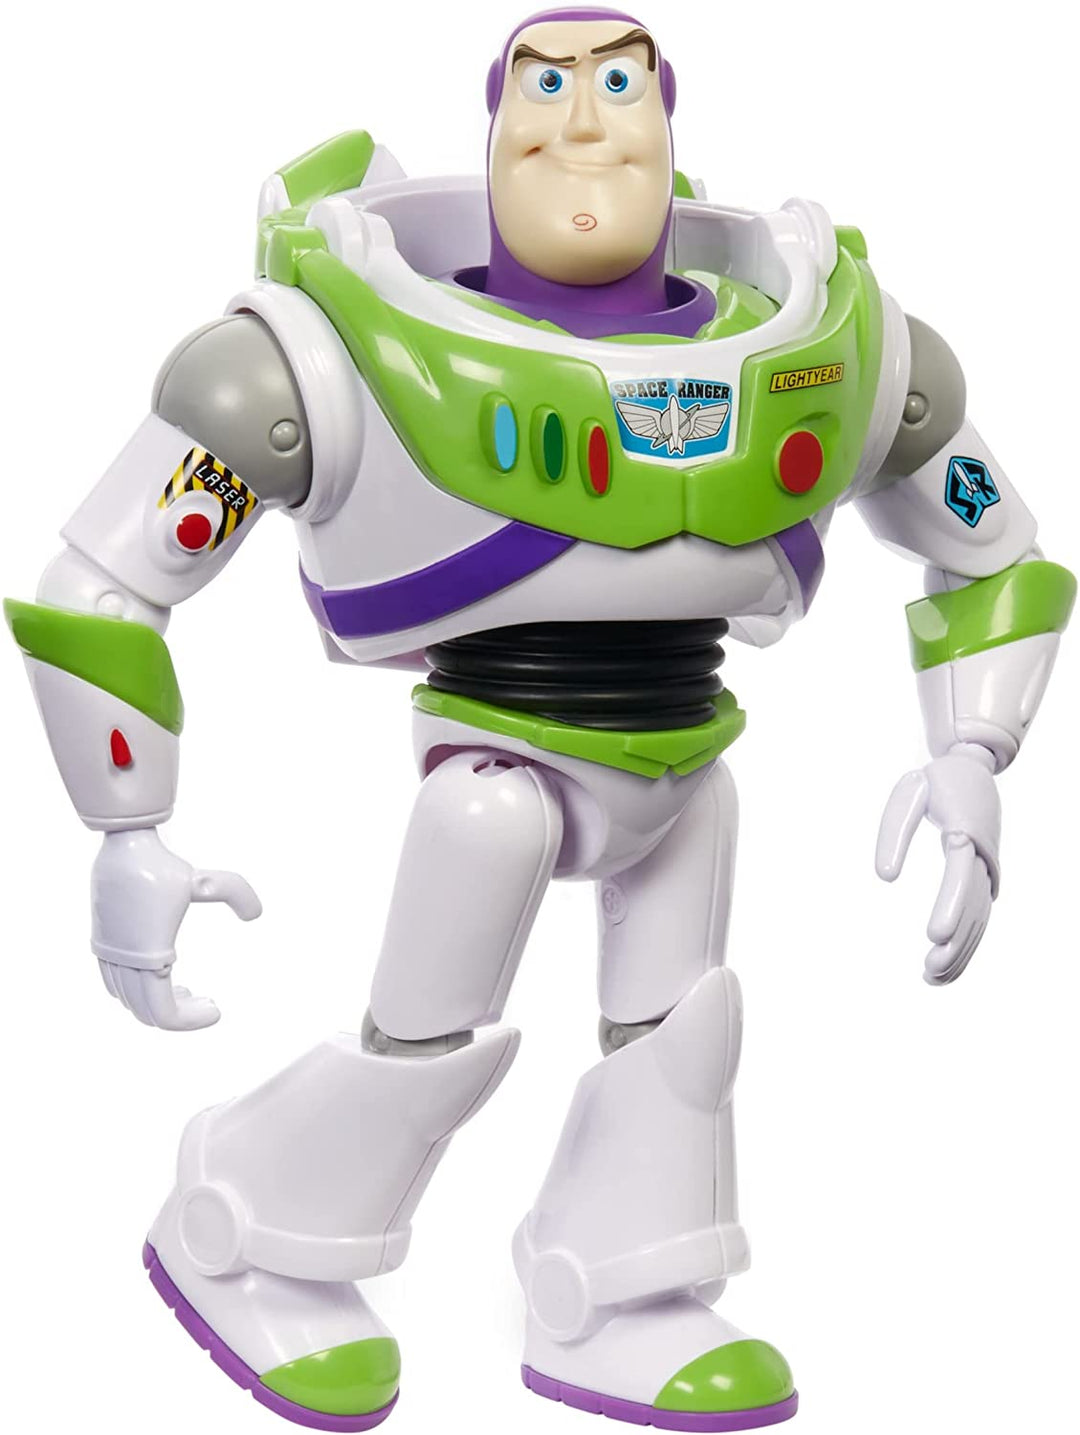 ?Disney Pixar Buzz Lightyear Large Action Figure 12 in Scale Highly Posable Auth